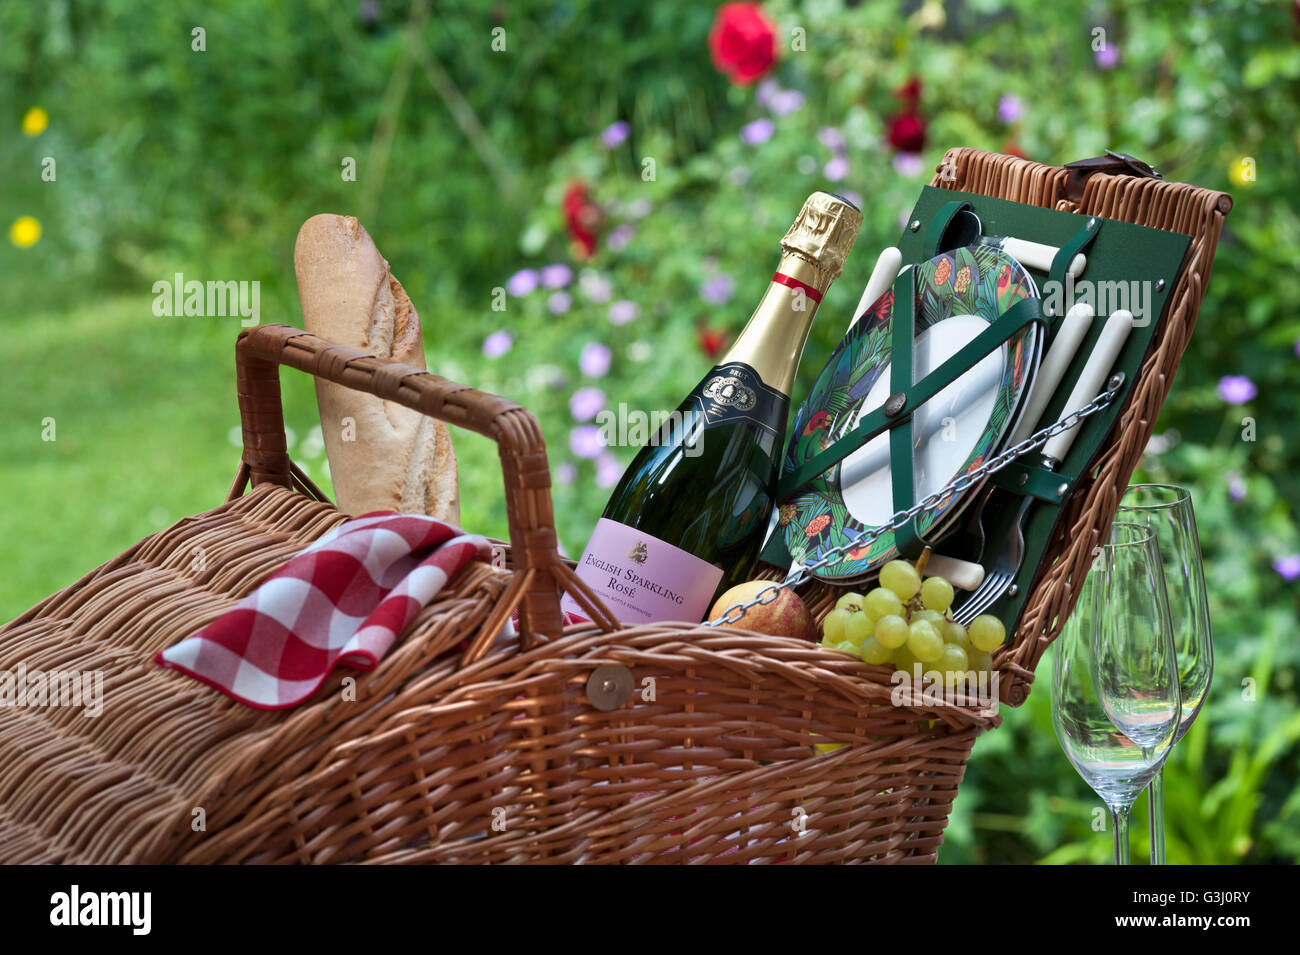 PICNIC HAMPER English sparkling Rosé wine bottle and wicker picnic basket in sunny floral garden situation Stock Photo